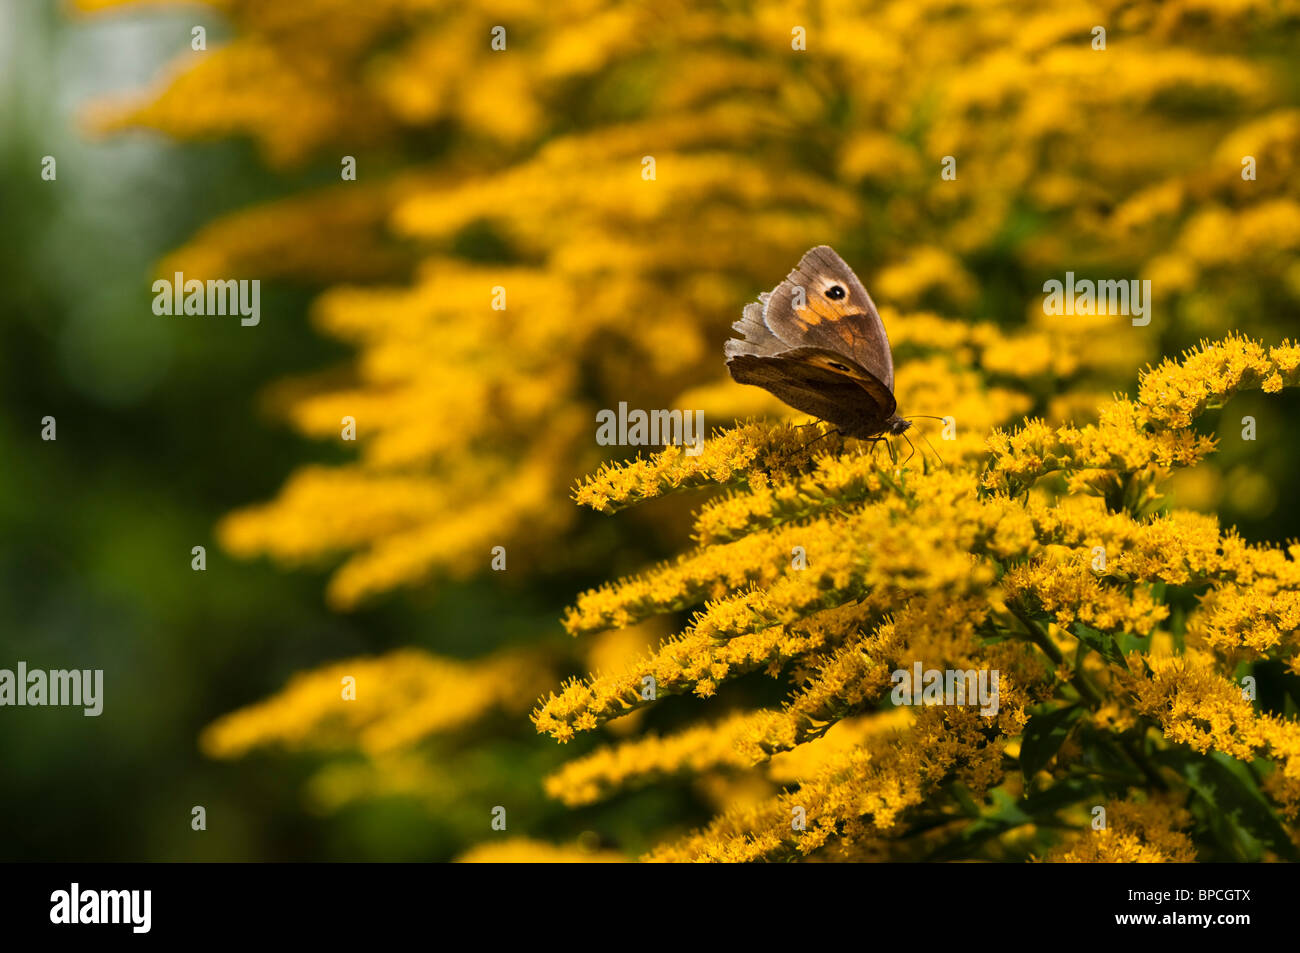 Female Meadow Brown butterfly, Maniloa jurtina on flowering Goldenrod Stock Photo